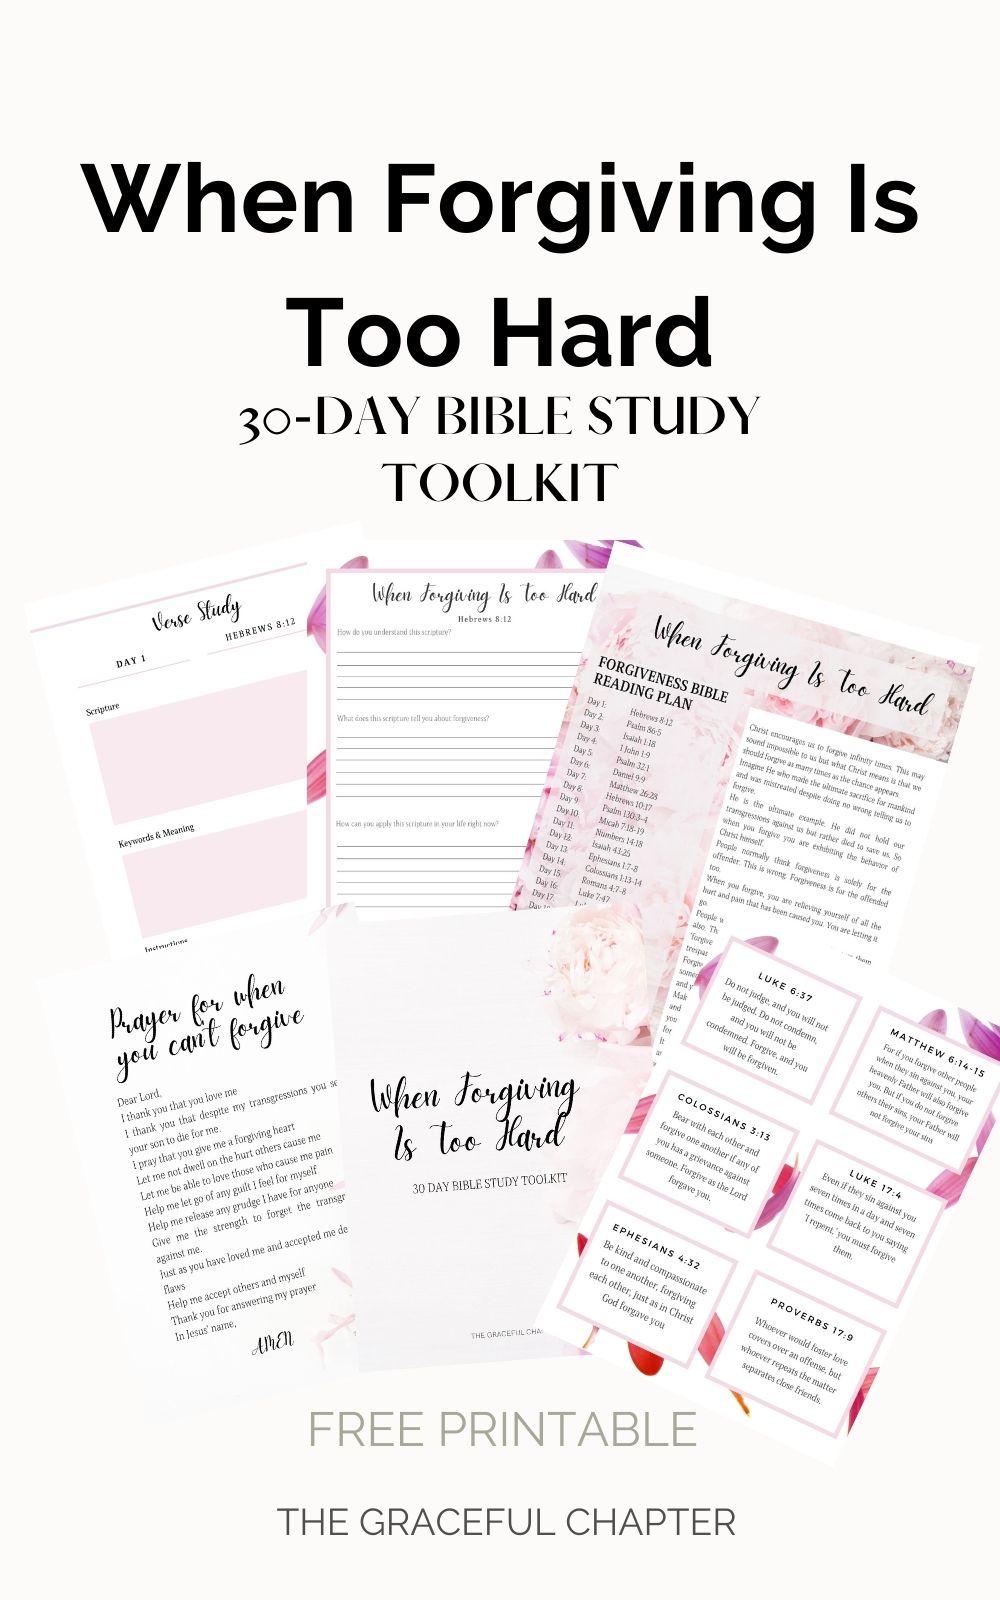 when forgiving is too hard - free 30 day bible study toolkit